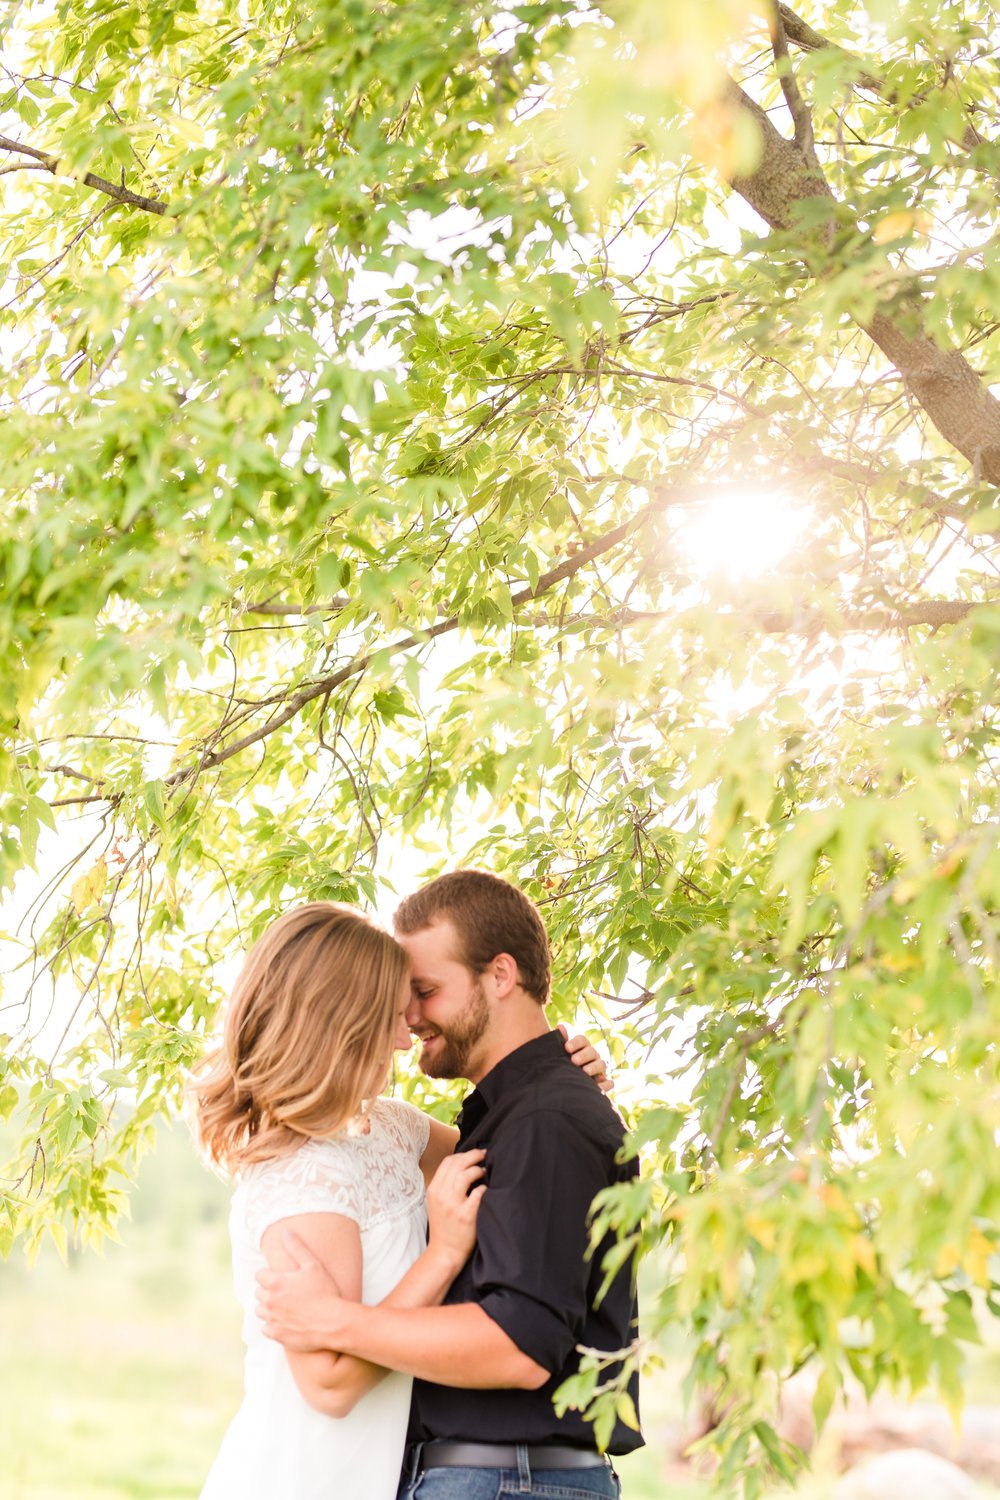 AmberLangerudPhotography_Countryside Engagement Session in Minnesota_3097.jpg